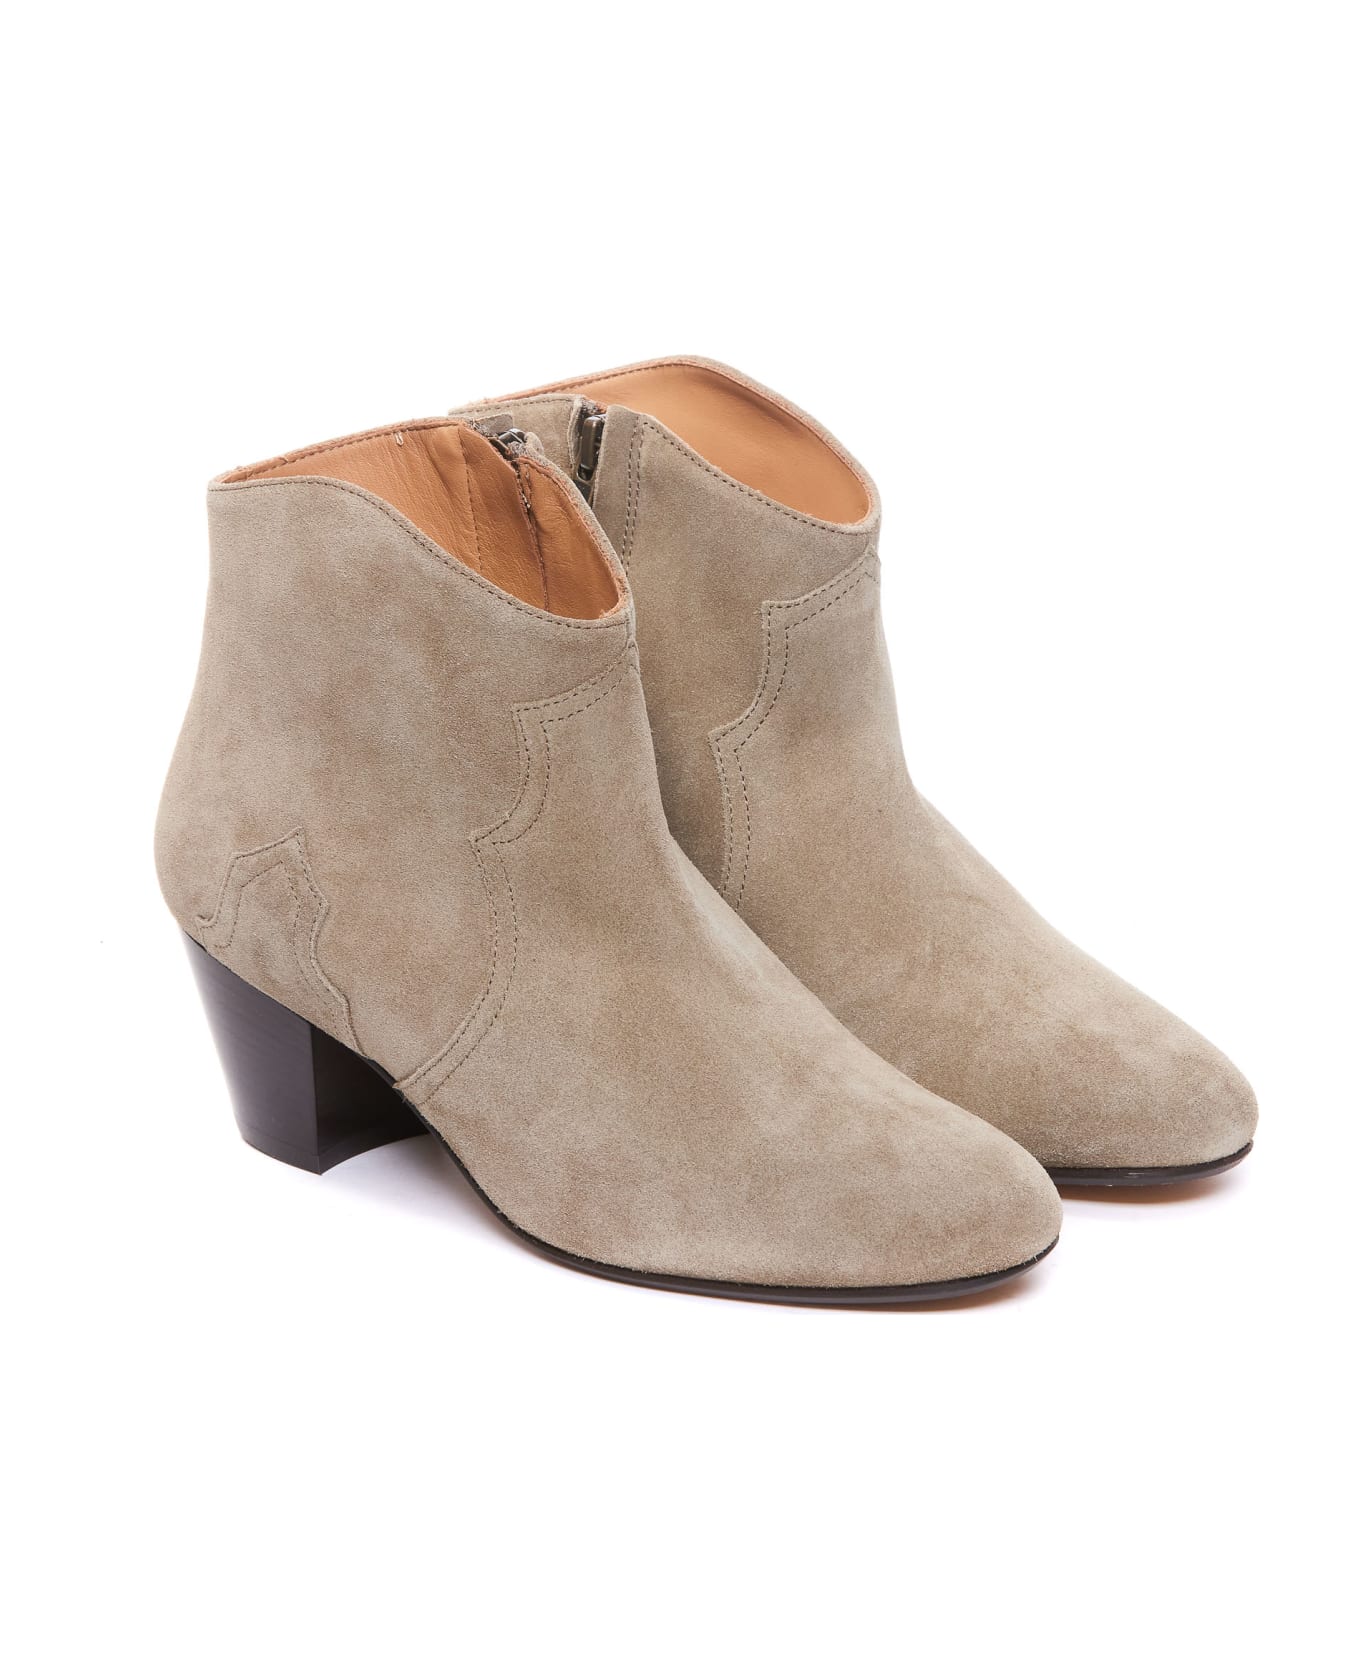 Isabel Marant Dicket Ankle Boots - Beige ブーツ